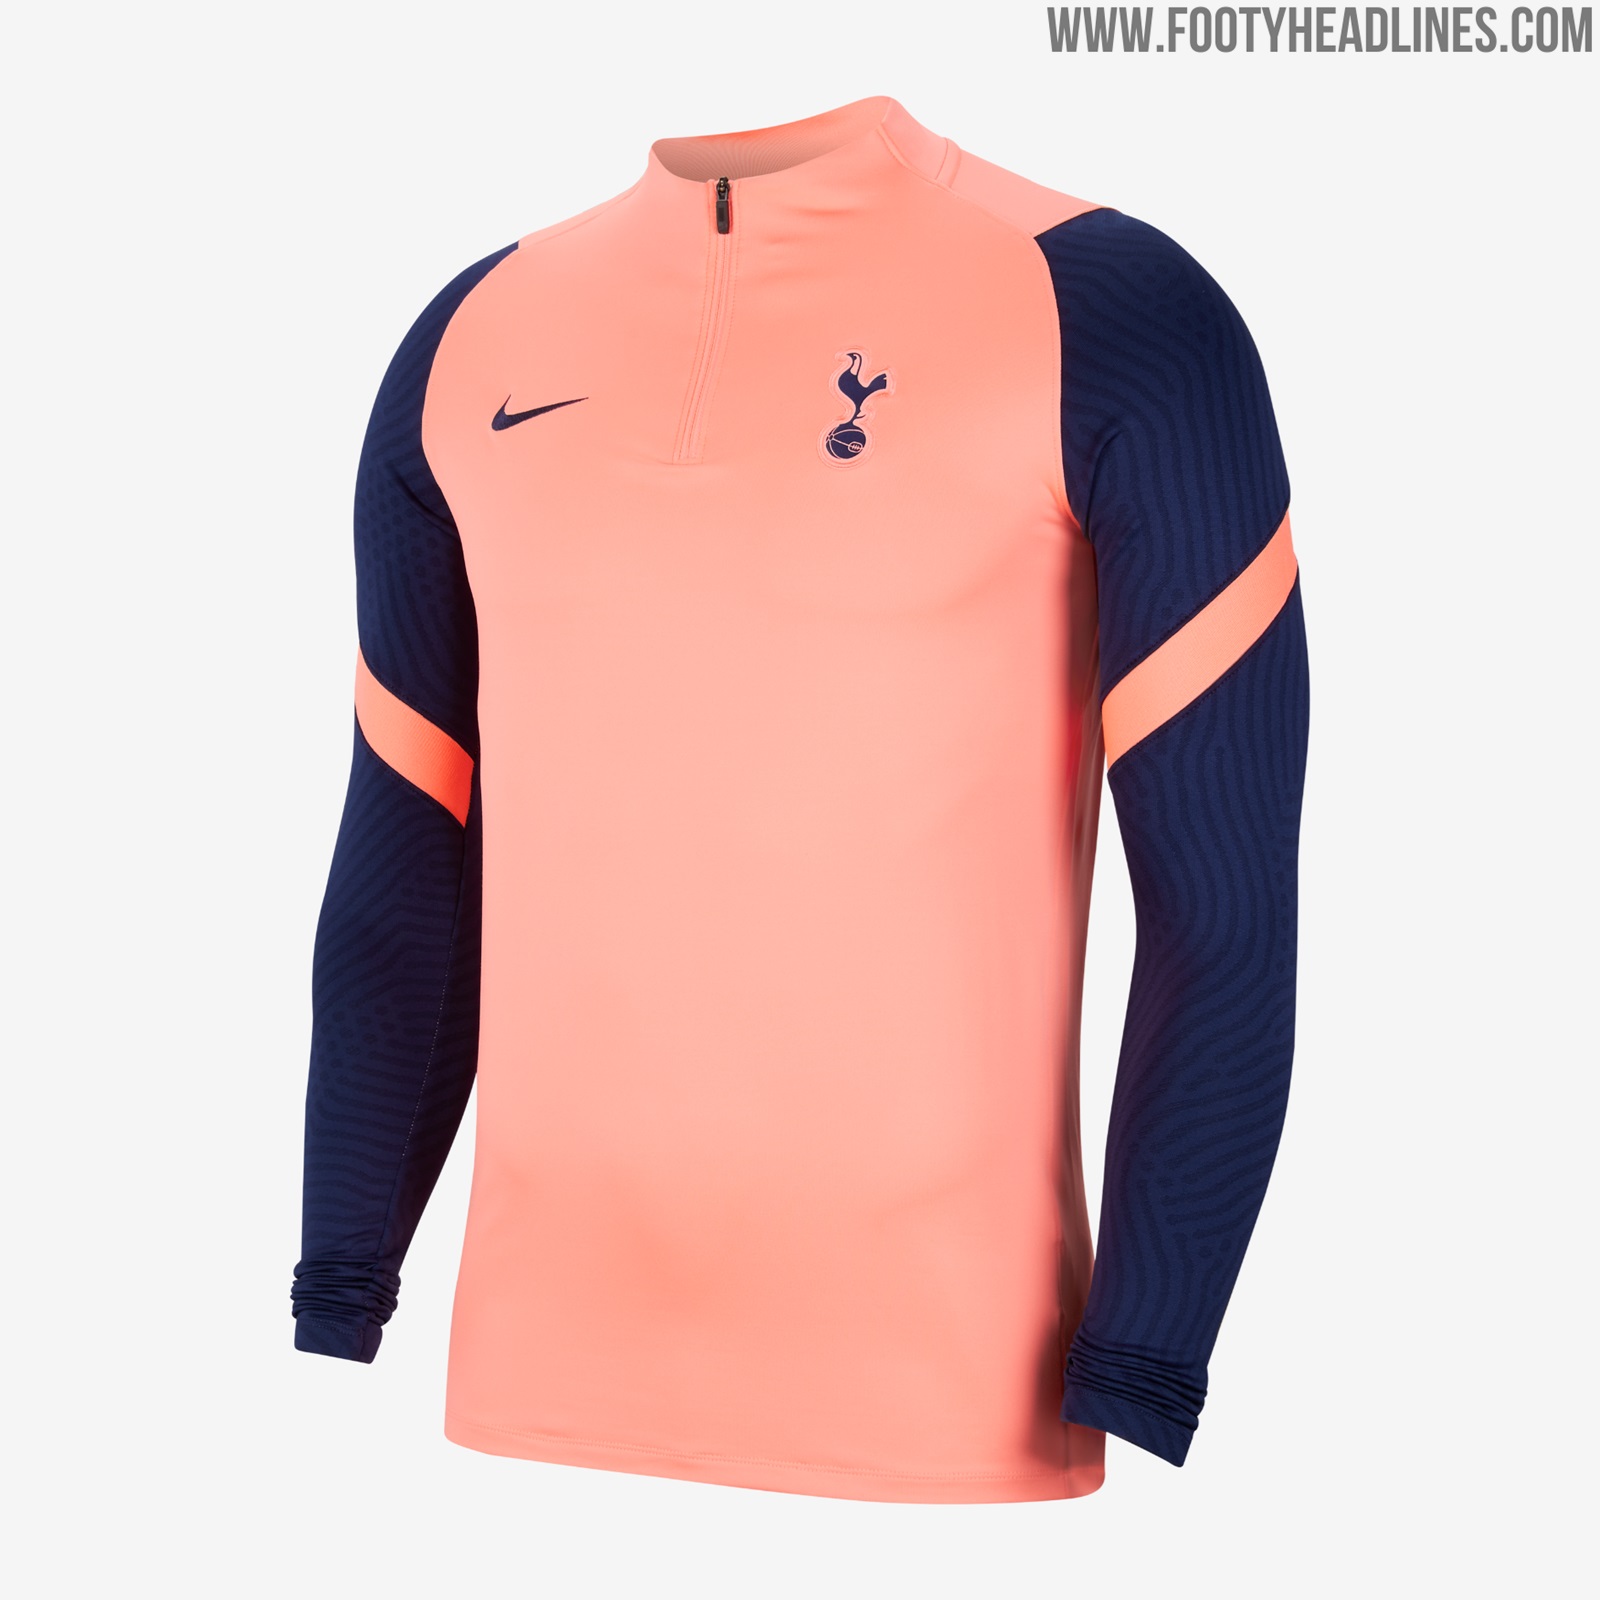 Nike Tottenham 20-21 Training Collection & Home Pre-Match Shirt Launched +  Home & Away Kit Release Date Confirmed - Footy Headlines